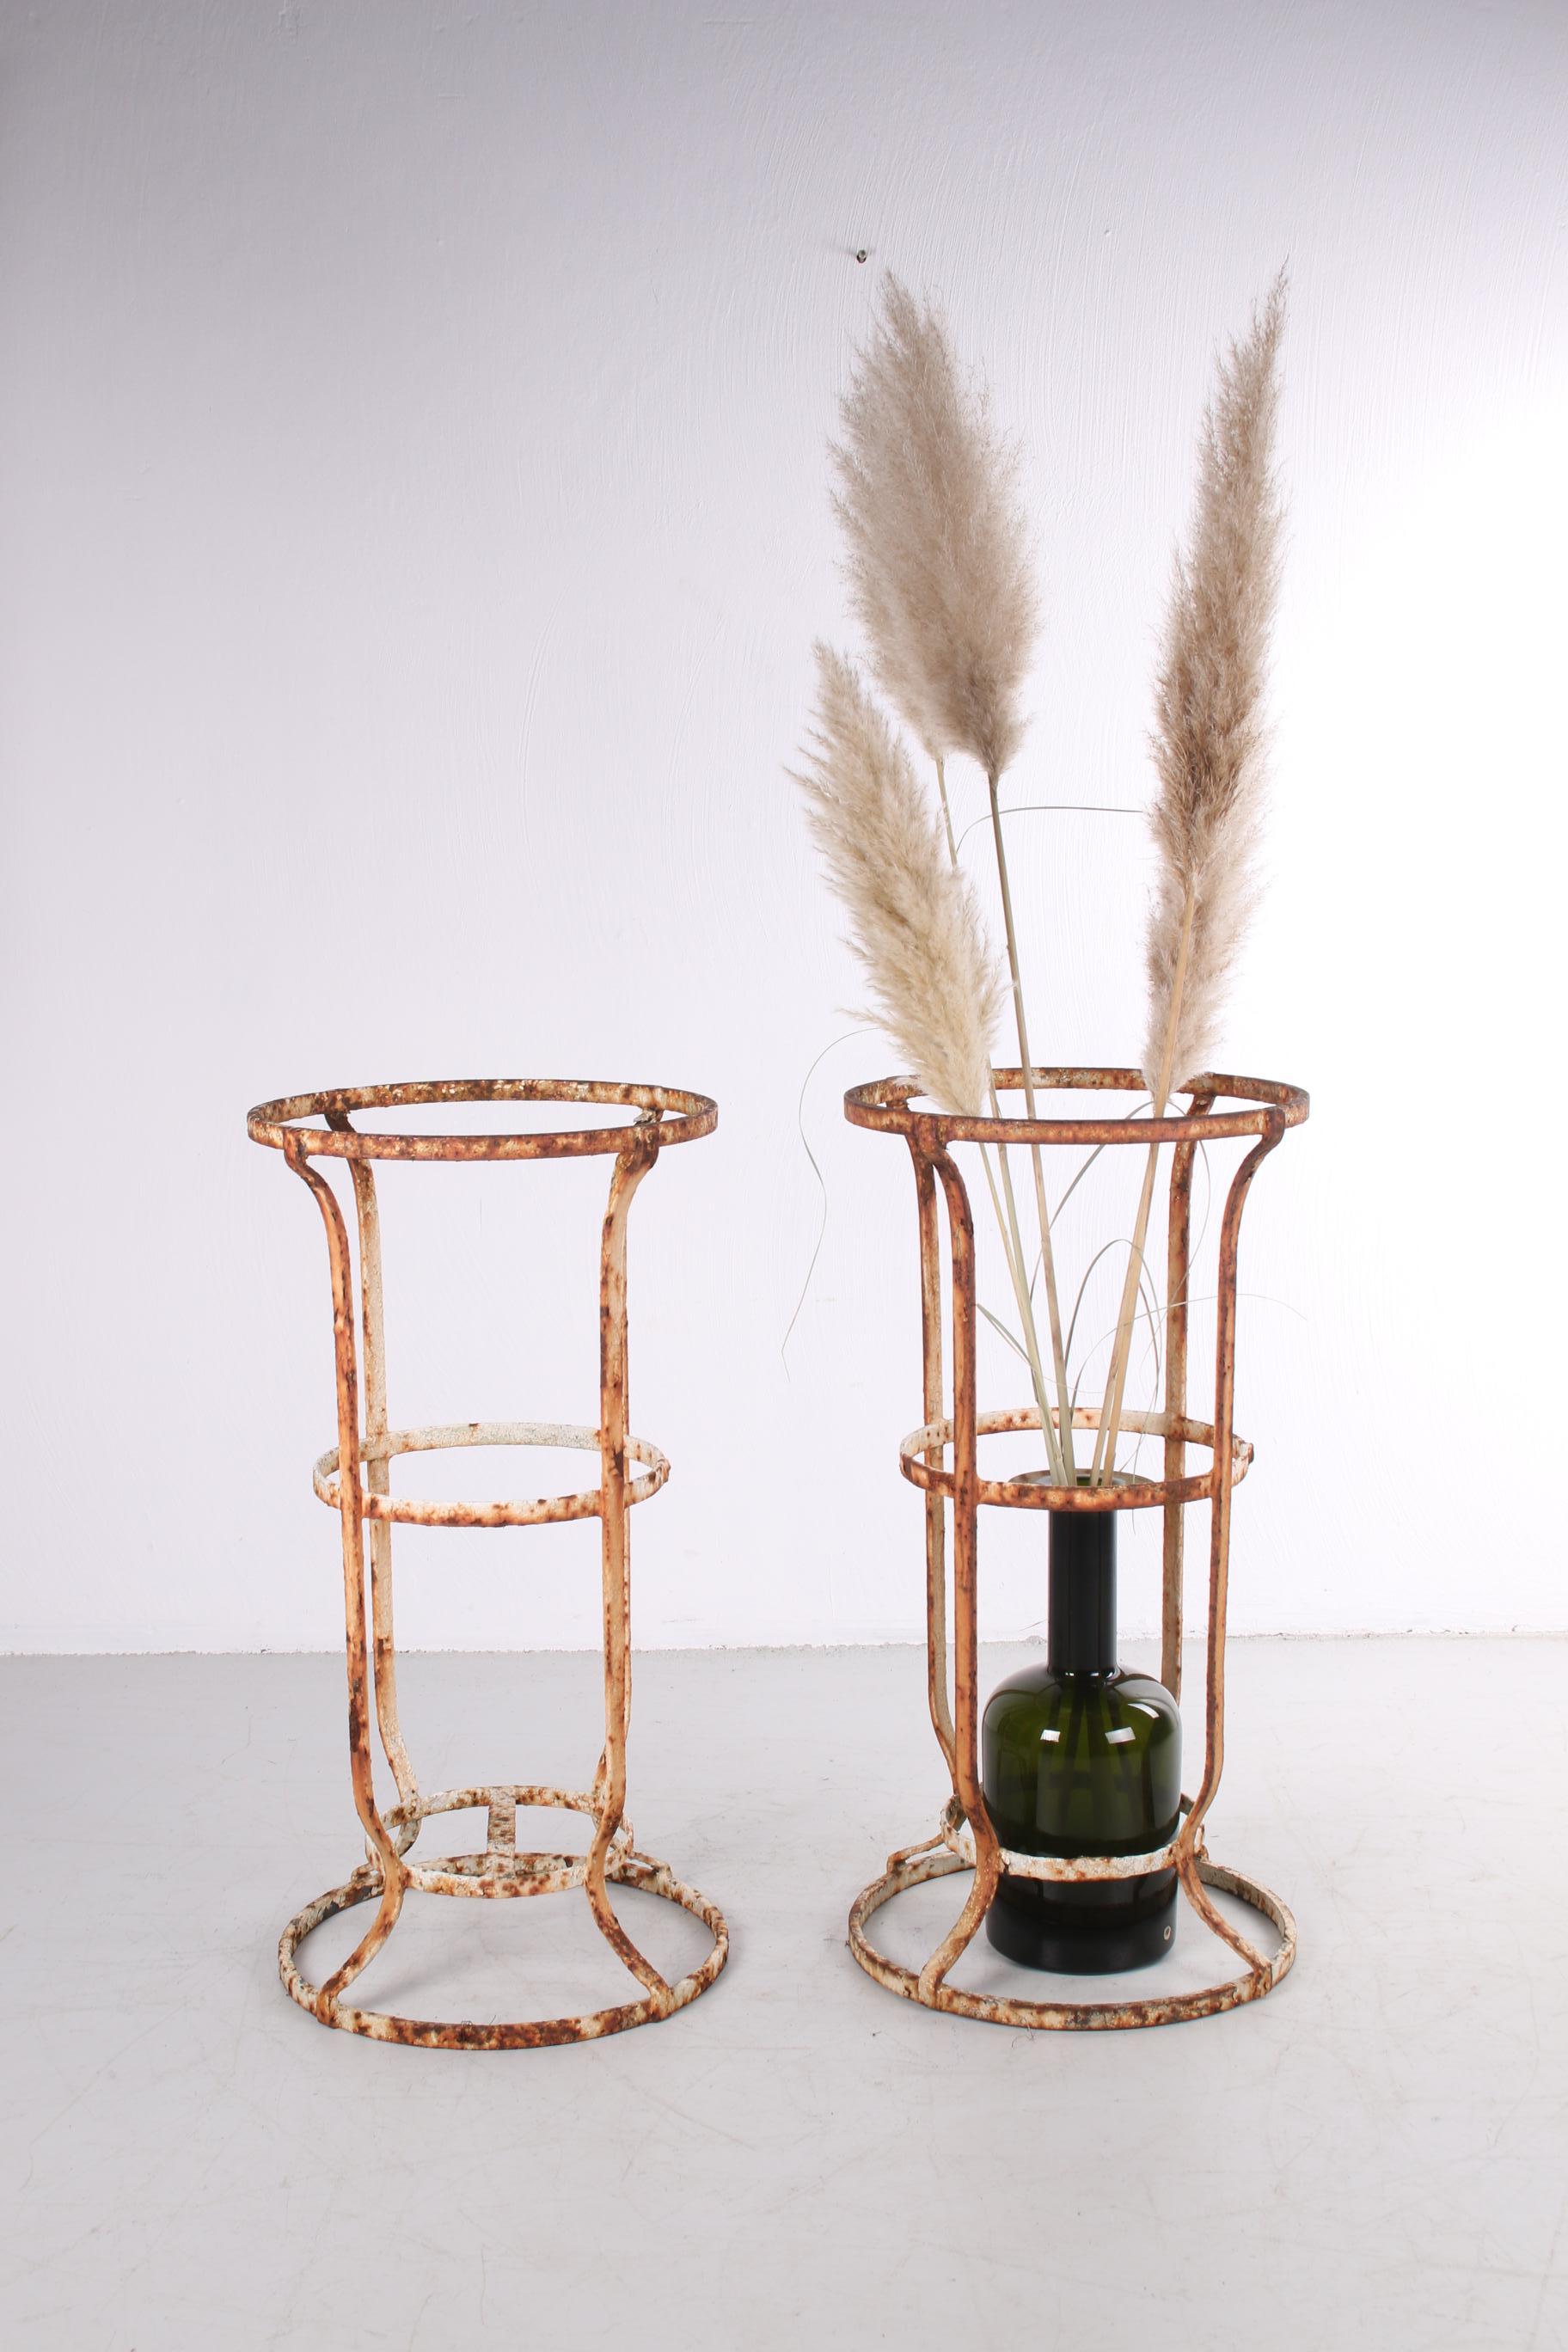 Very old wrought iron French garden stand a set of 2 with beautiful patina Dates from around 1900s.

This set comes from the South of France once bought at an antique fair. The patina is beautifully blended together with the cream/white original